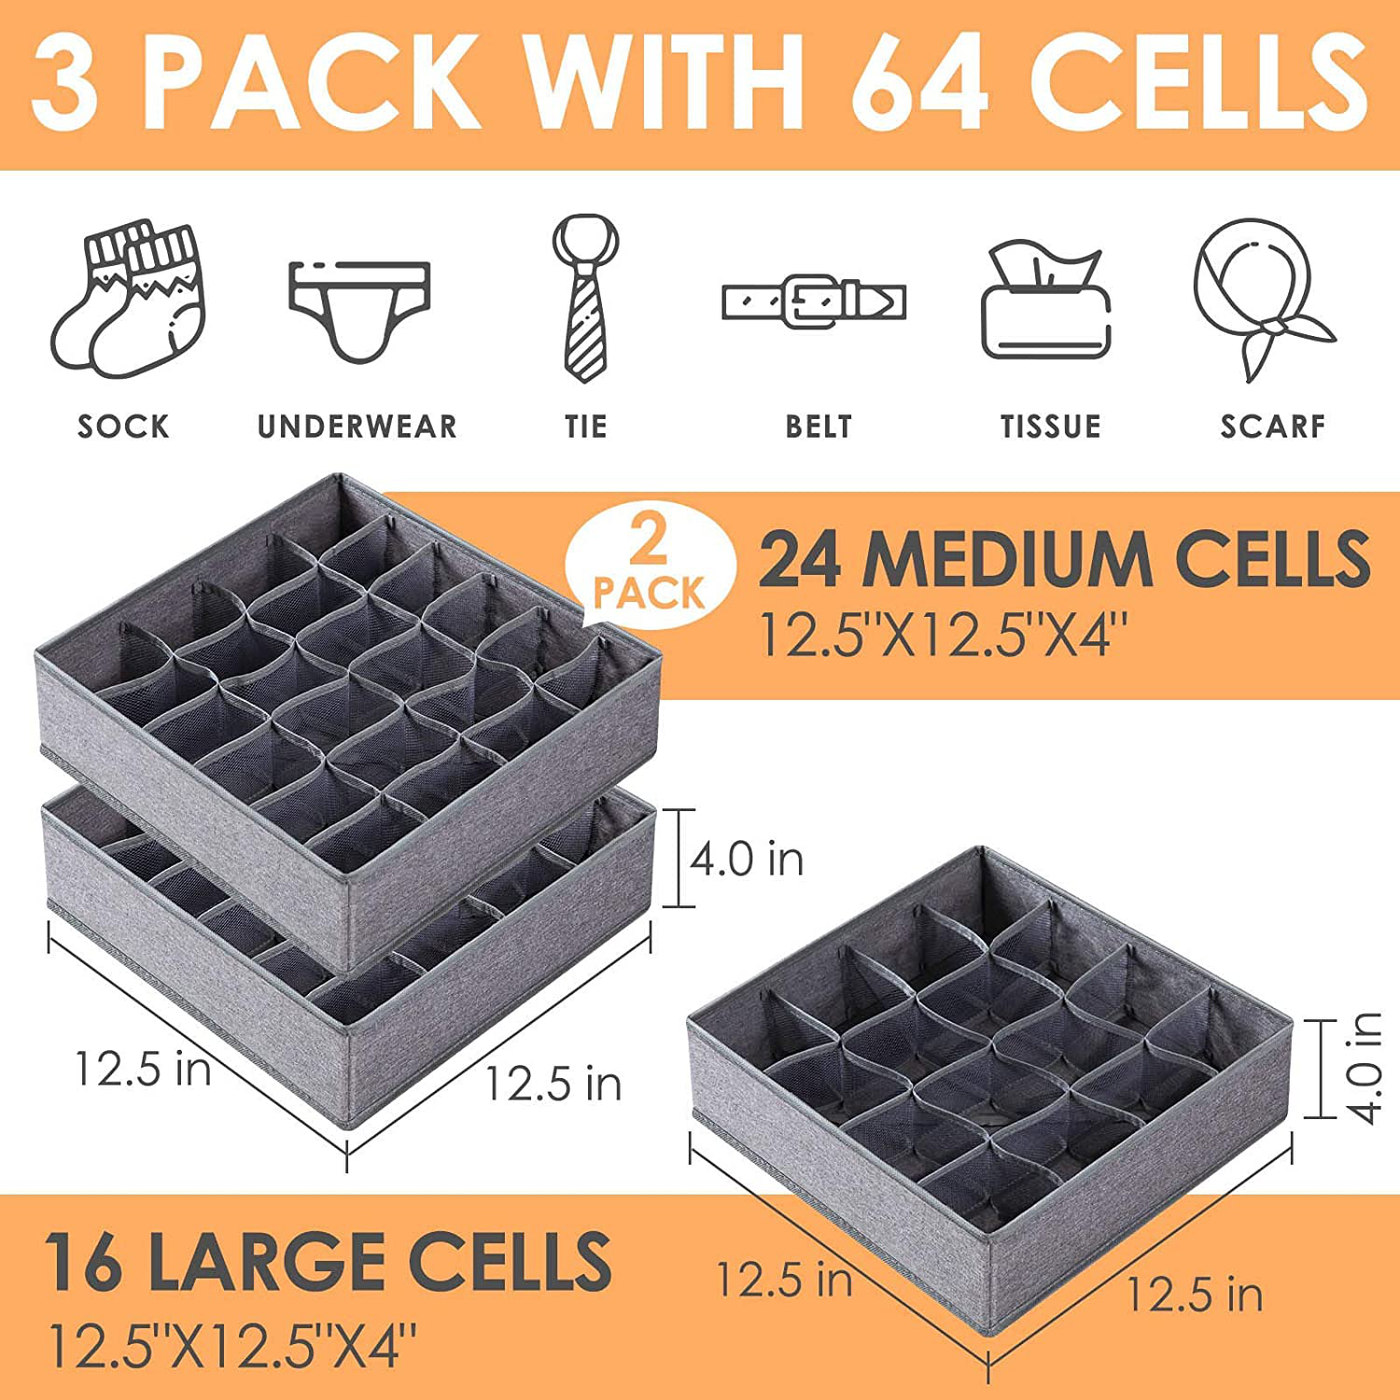 3 Pack Sock Underwear Organizer Dividers, 64 Cell Fabric Foldable Cabinet Closet Organizers and Storage Boxes for Storing Socks, Underwear, Ties (16+24+24 Cell, Black)